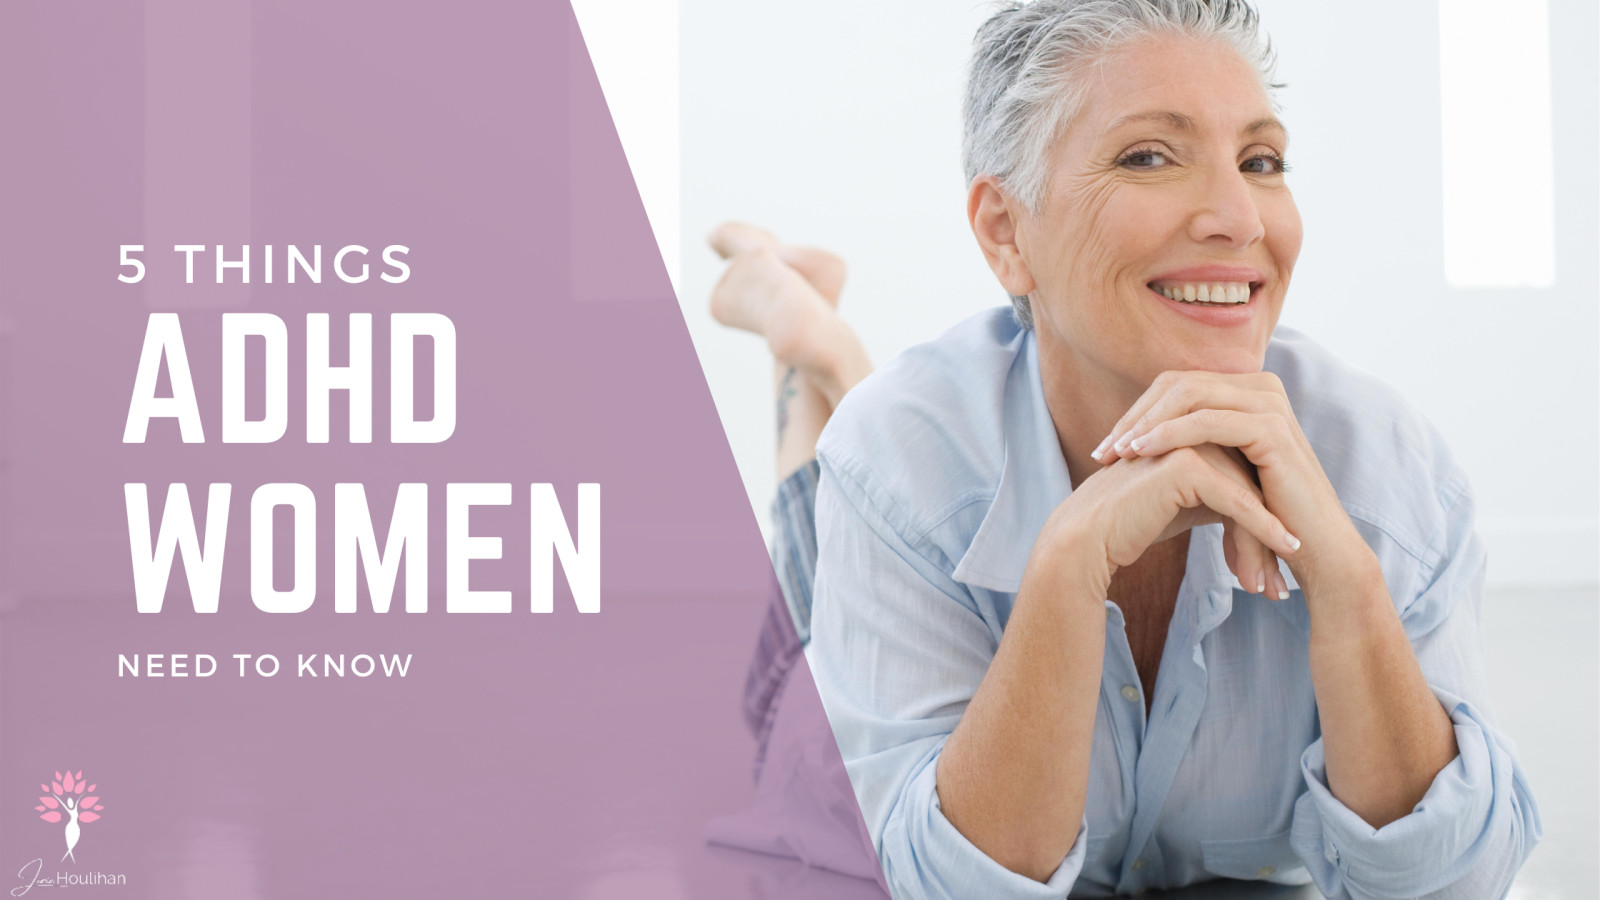 5 Things Women with ADHD Need to Know